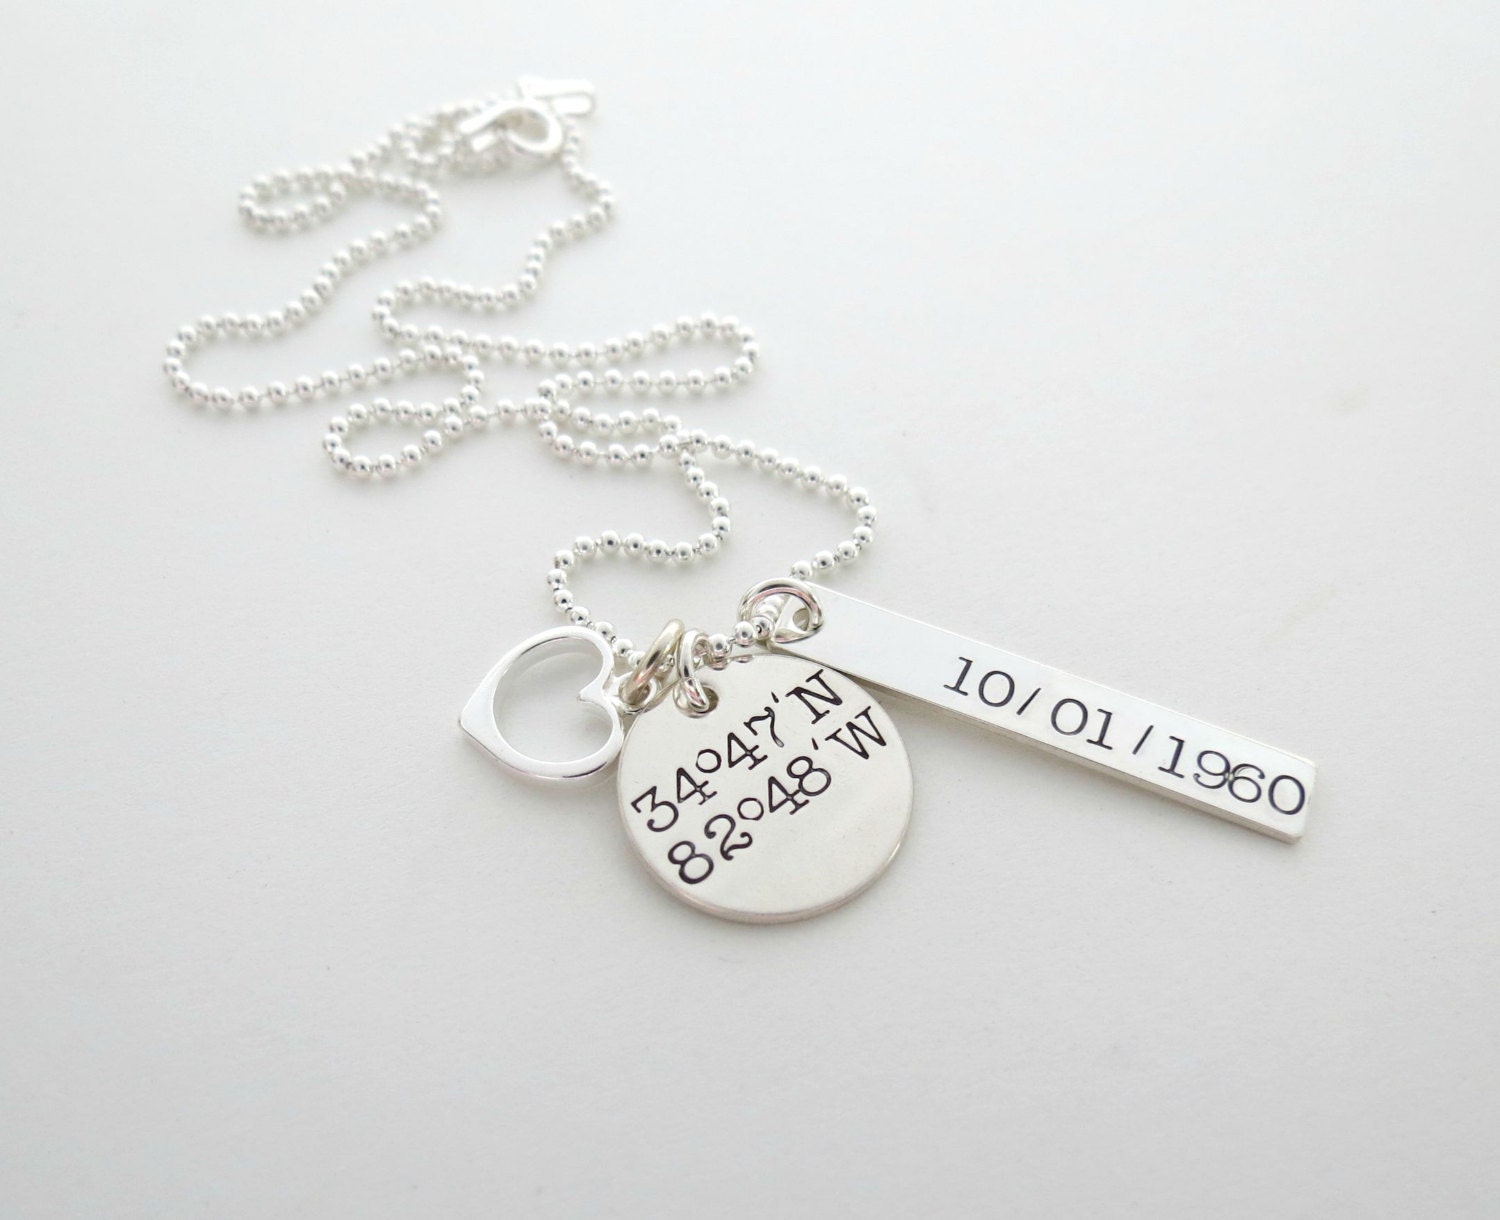 Personalized Coordinates Necklace Longitude by JewelryByRMSmith